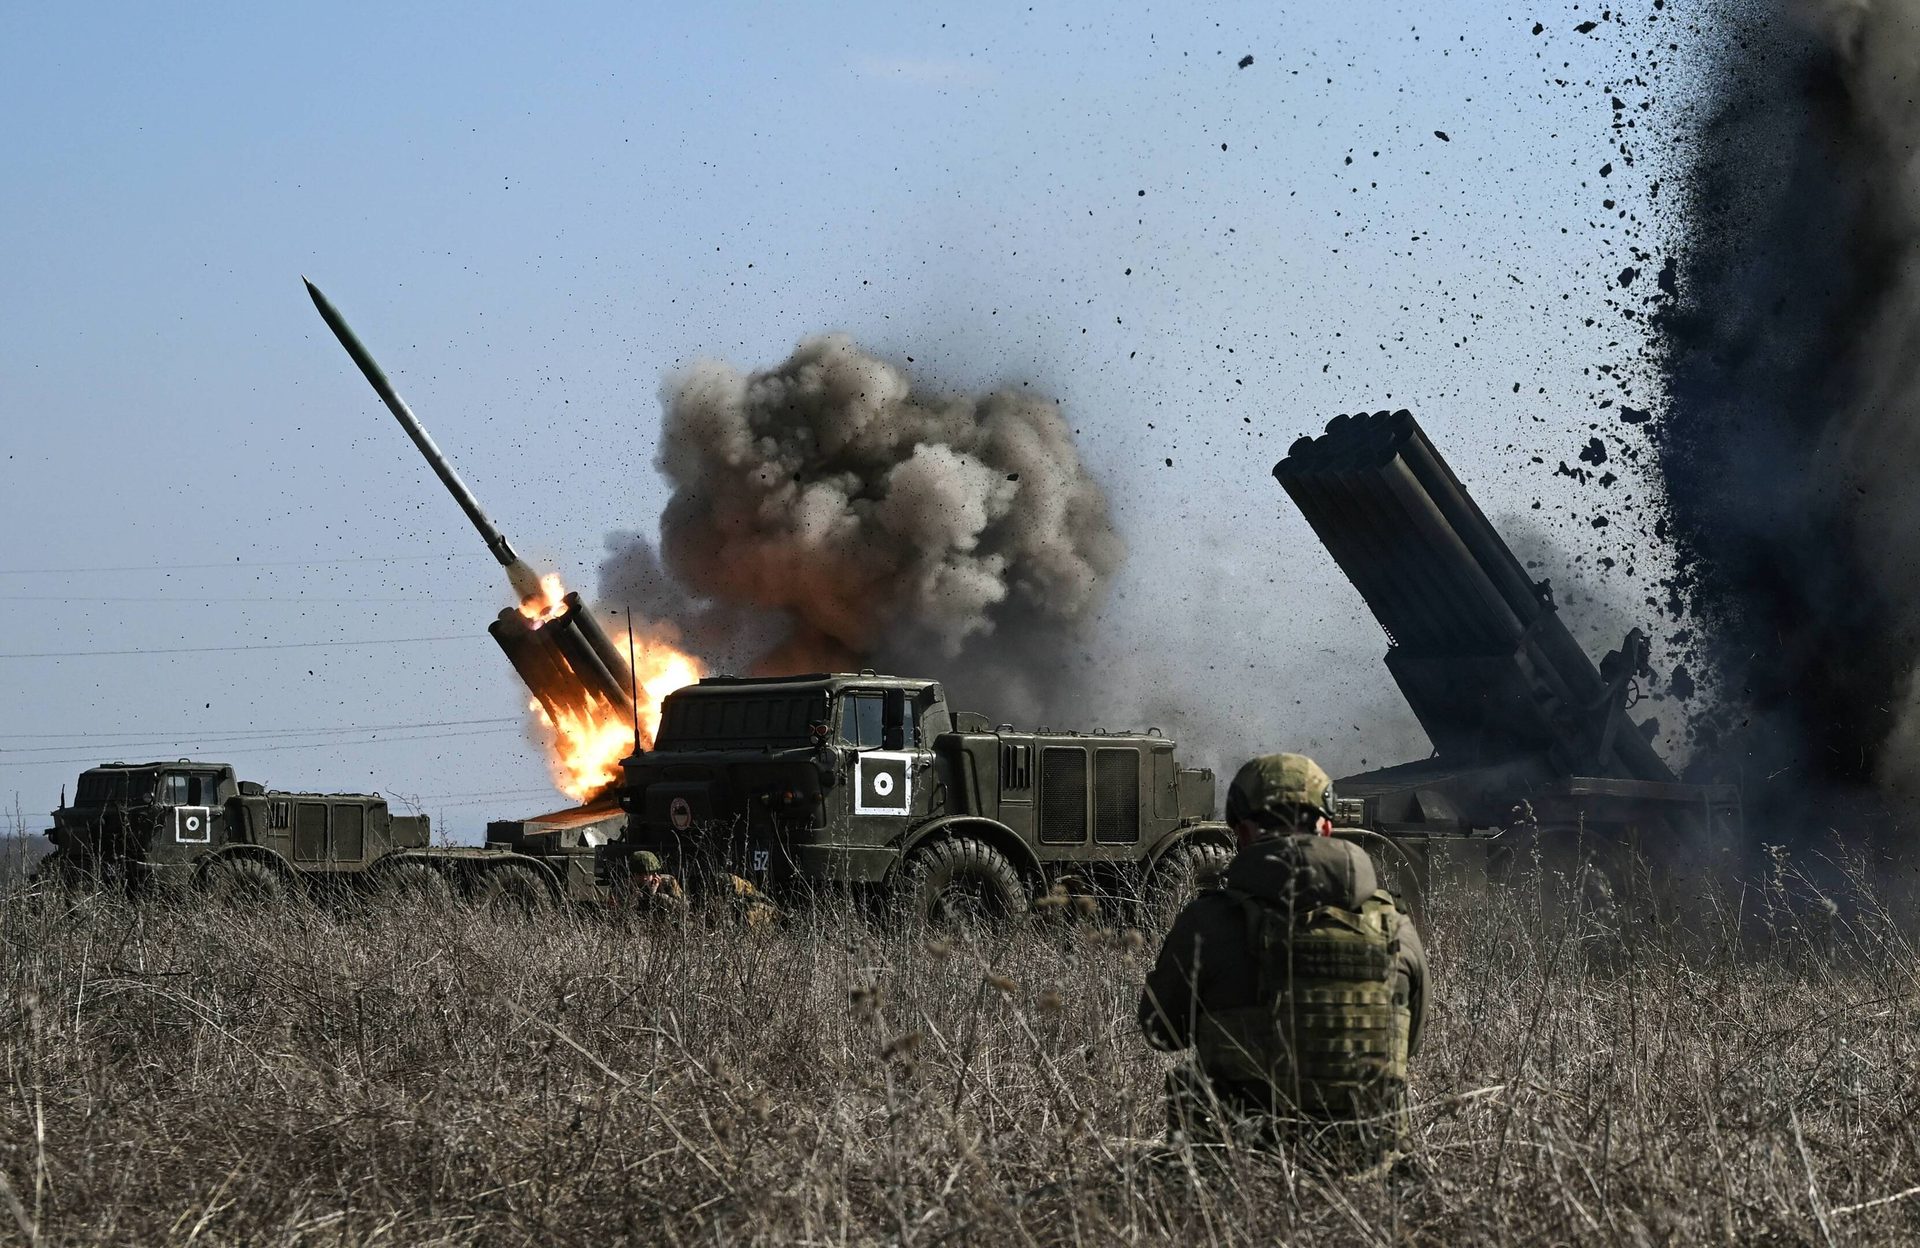 Combat vehicle, Military person, Self-propelled artillery, Sky, Plant, Marines